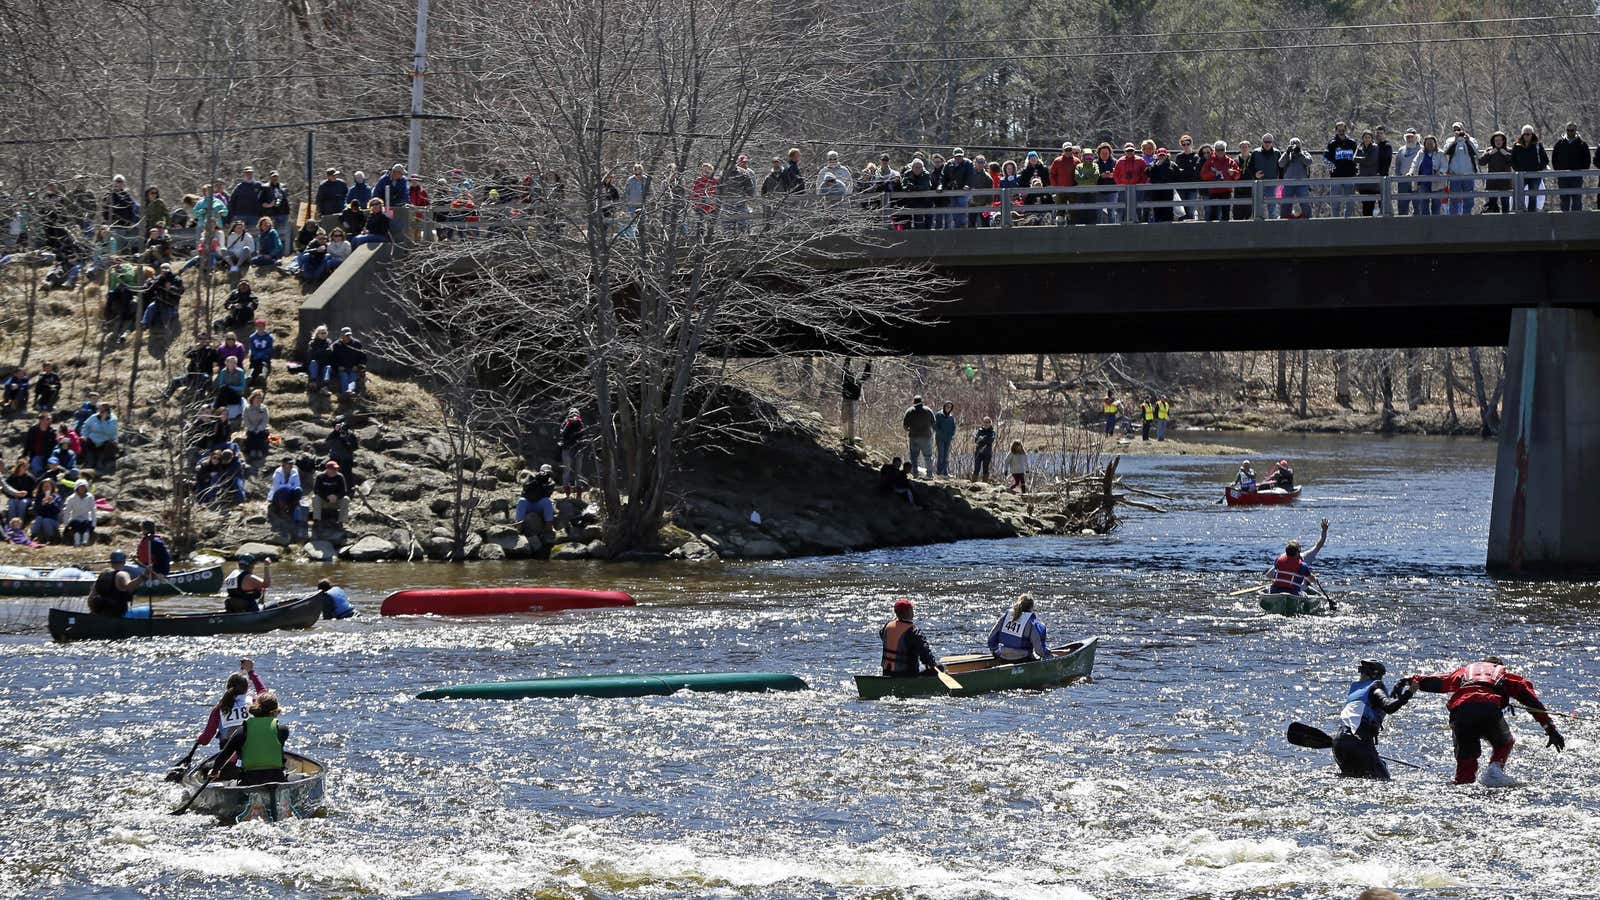 In Bangor, Maine, you can race canoes and inhale some of the cleanest urban air in the US.